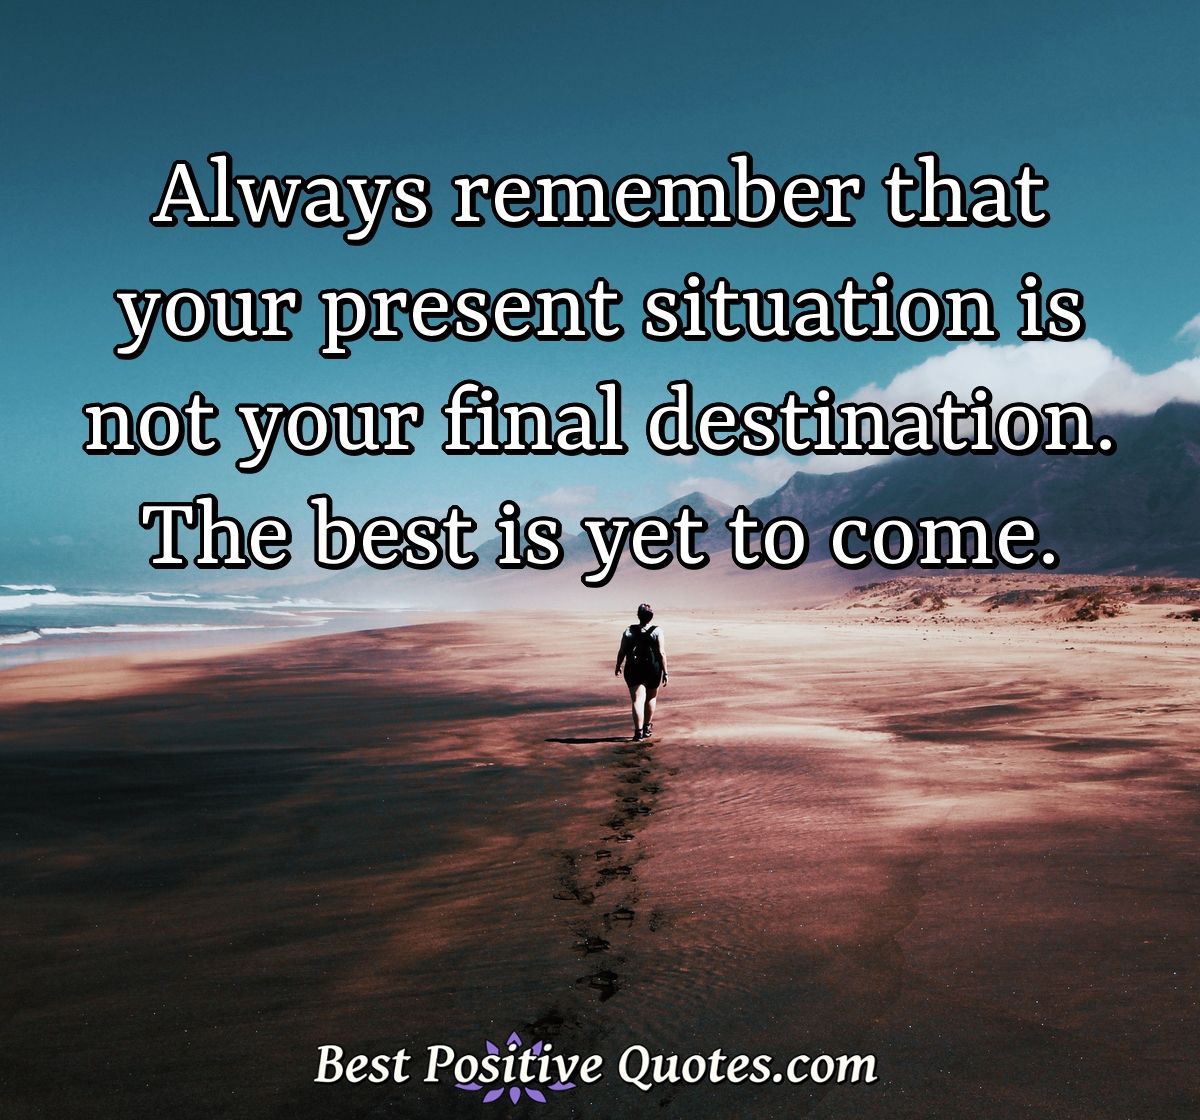 Always remember that your present situation is not your final destination. The best is yet to come. - Anonymous